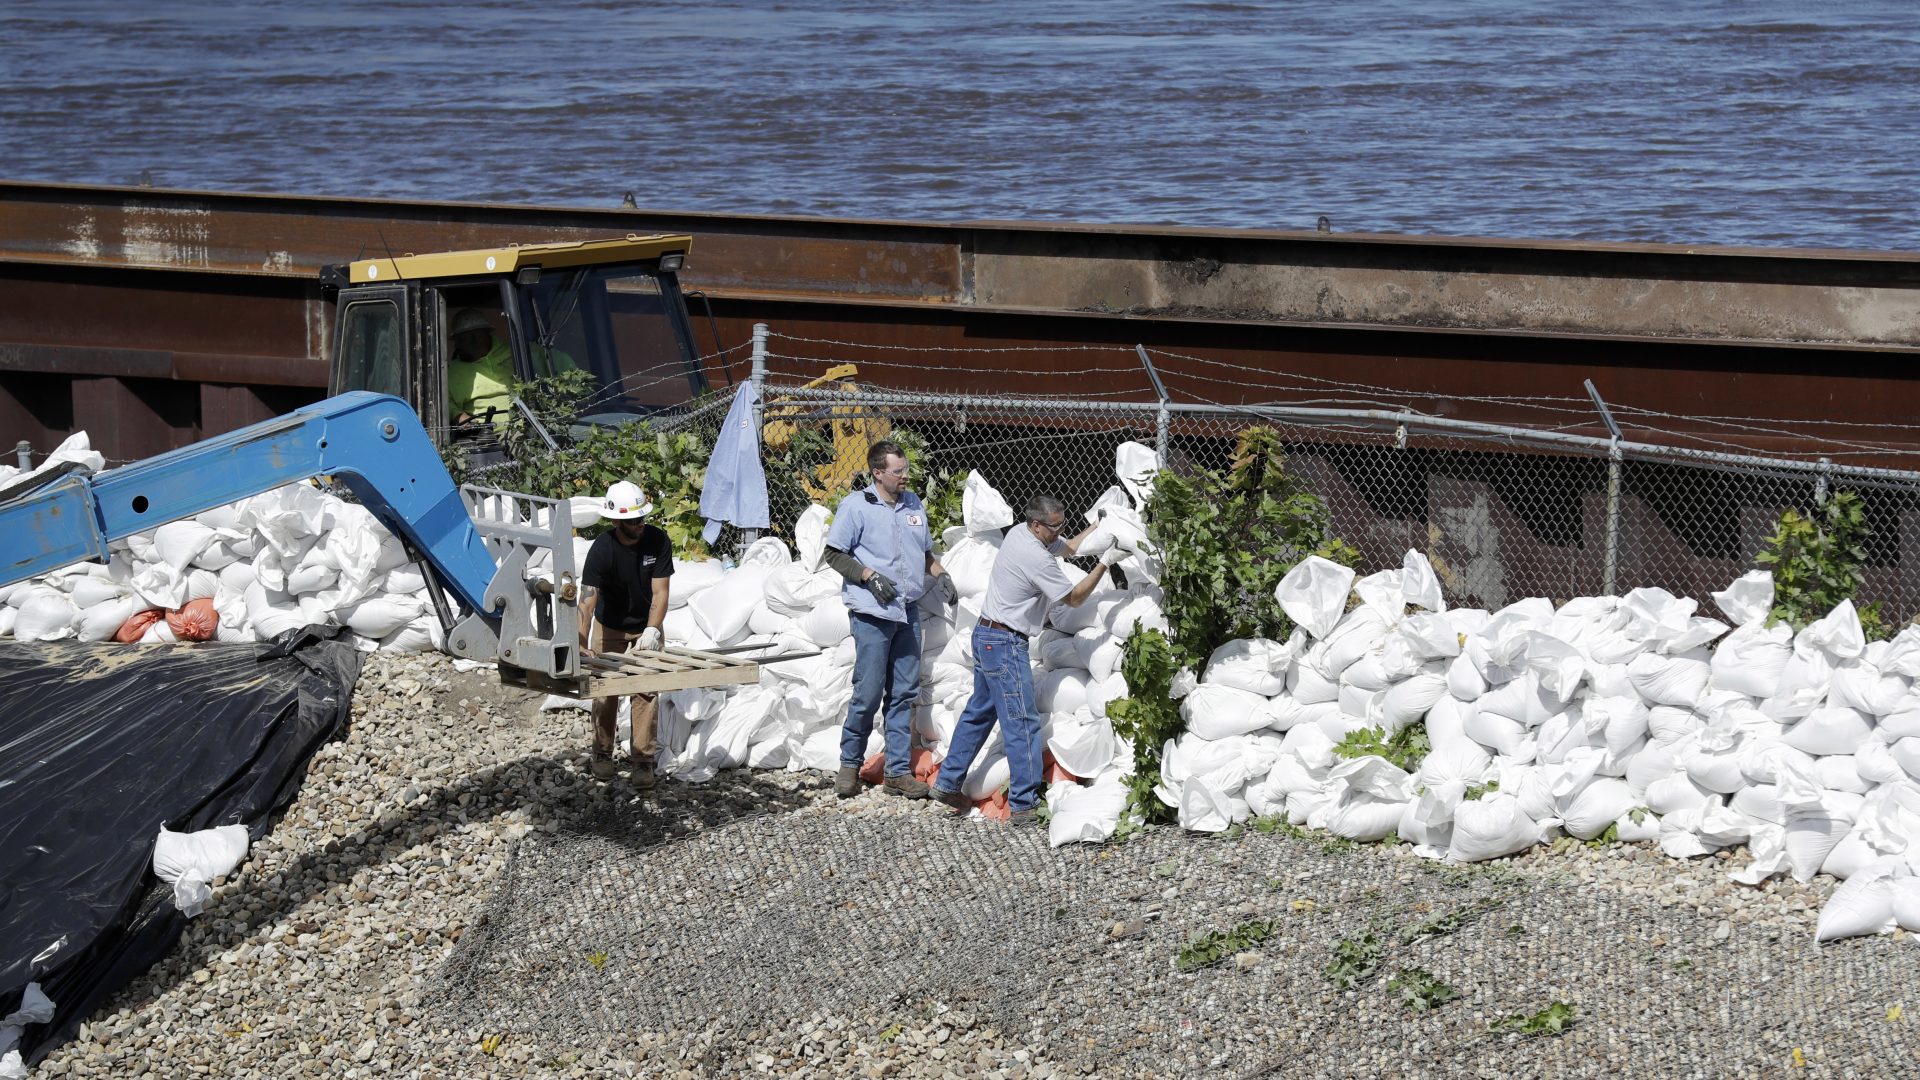 Workers build a sandbag wall near the Cedar River in Iowa in 2016. Disaster response experts say aid workers and others who could assist may not be able to travel during the pandemic.